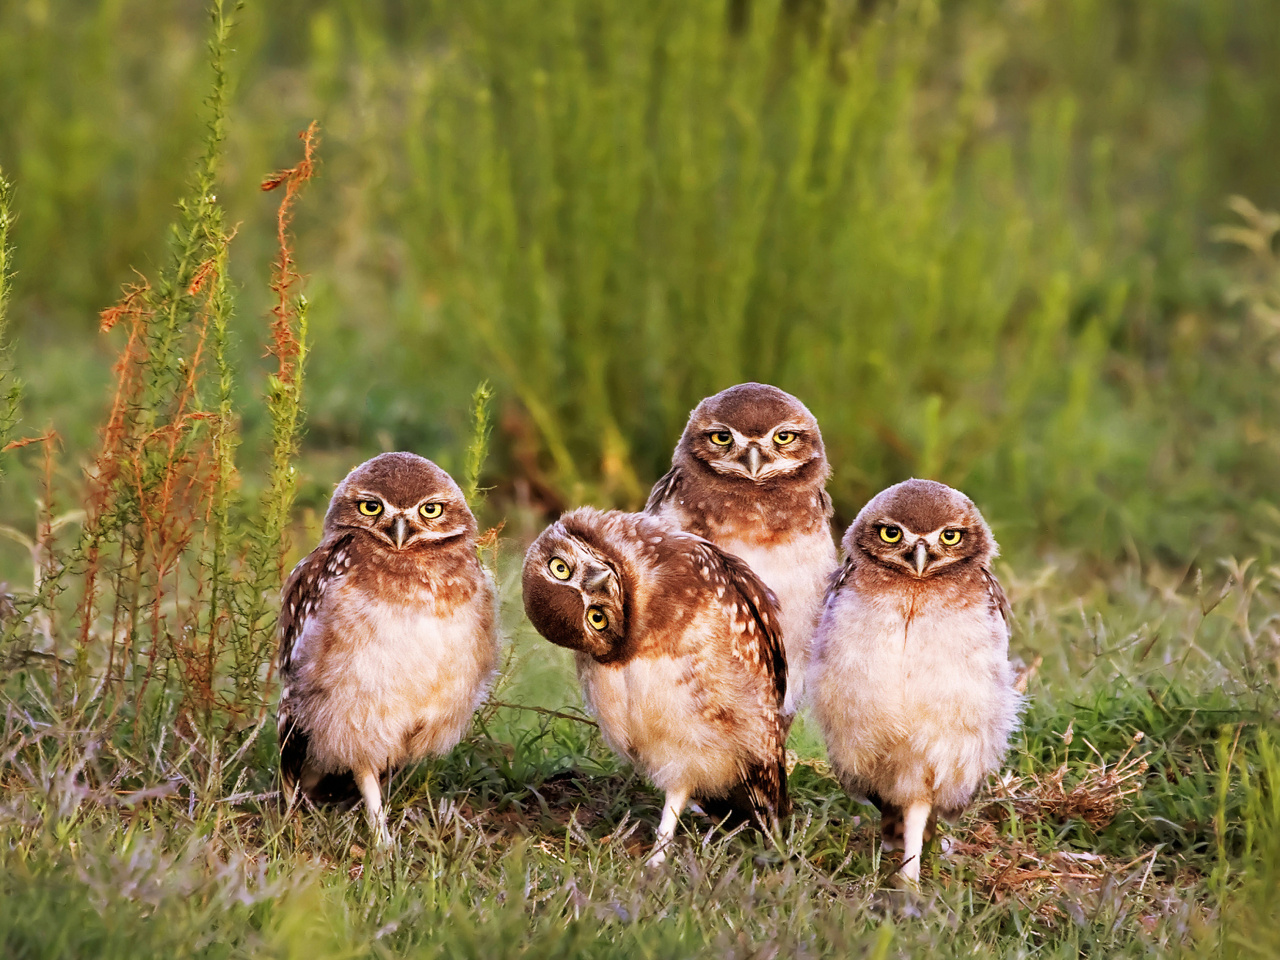 Morning with owls wallpaper 1280x960